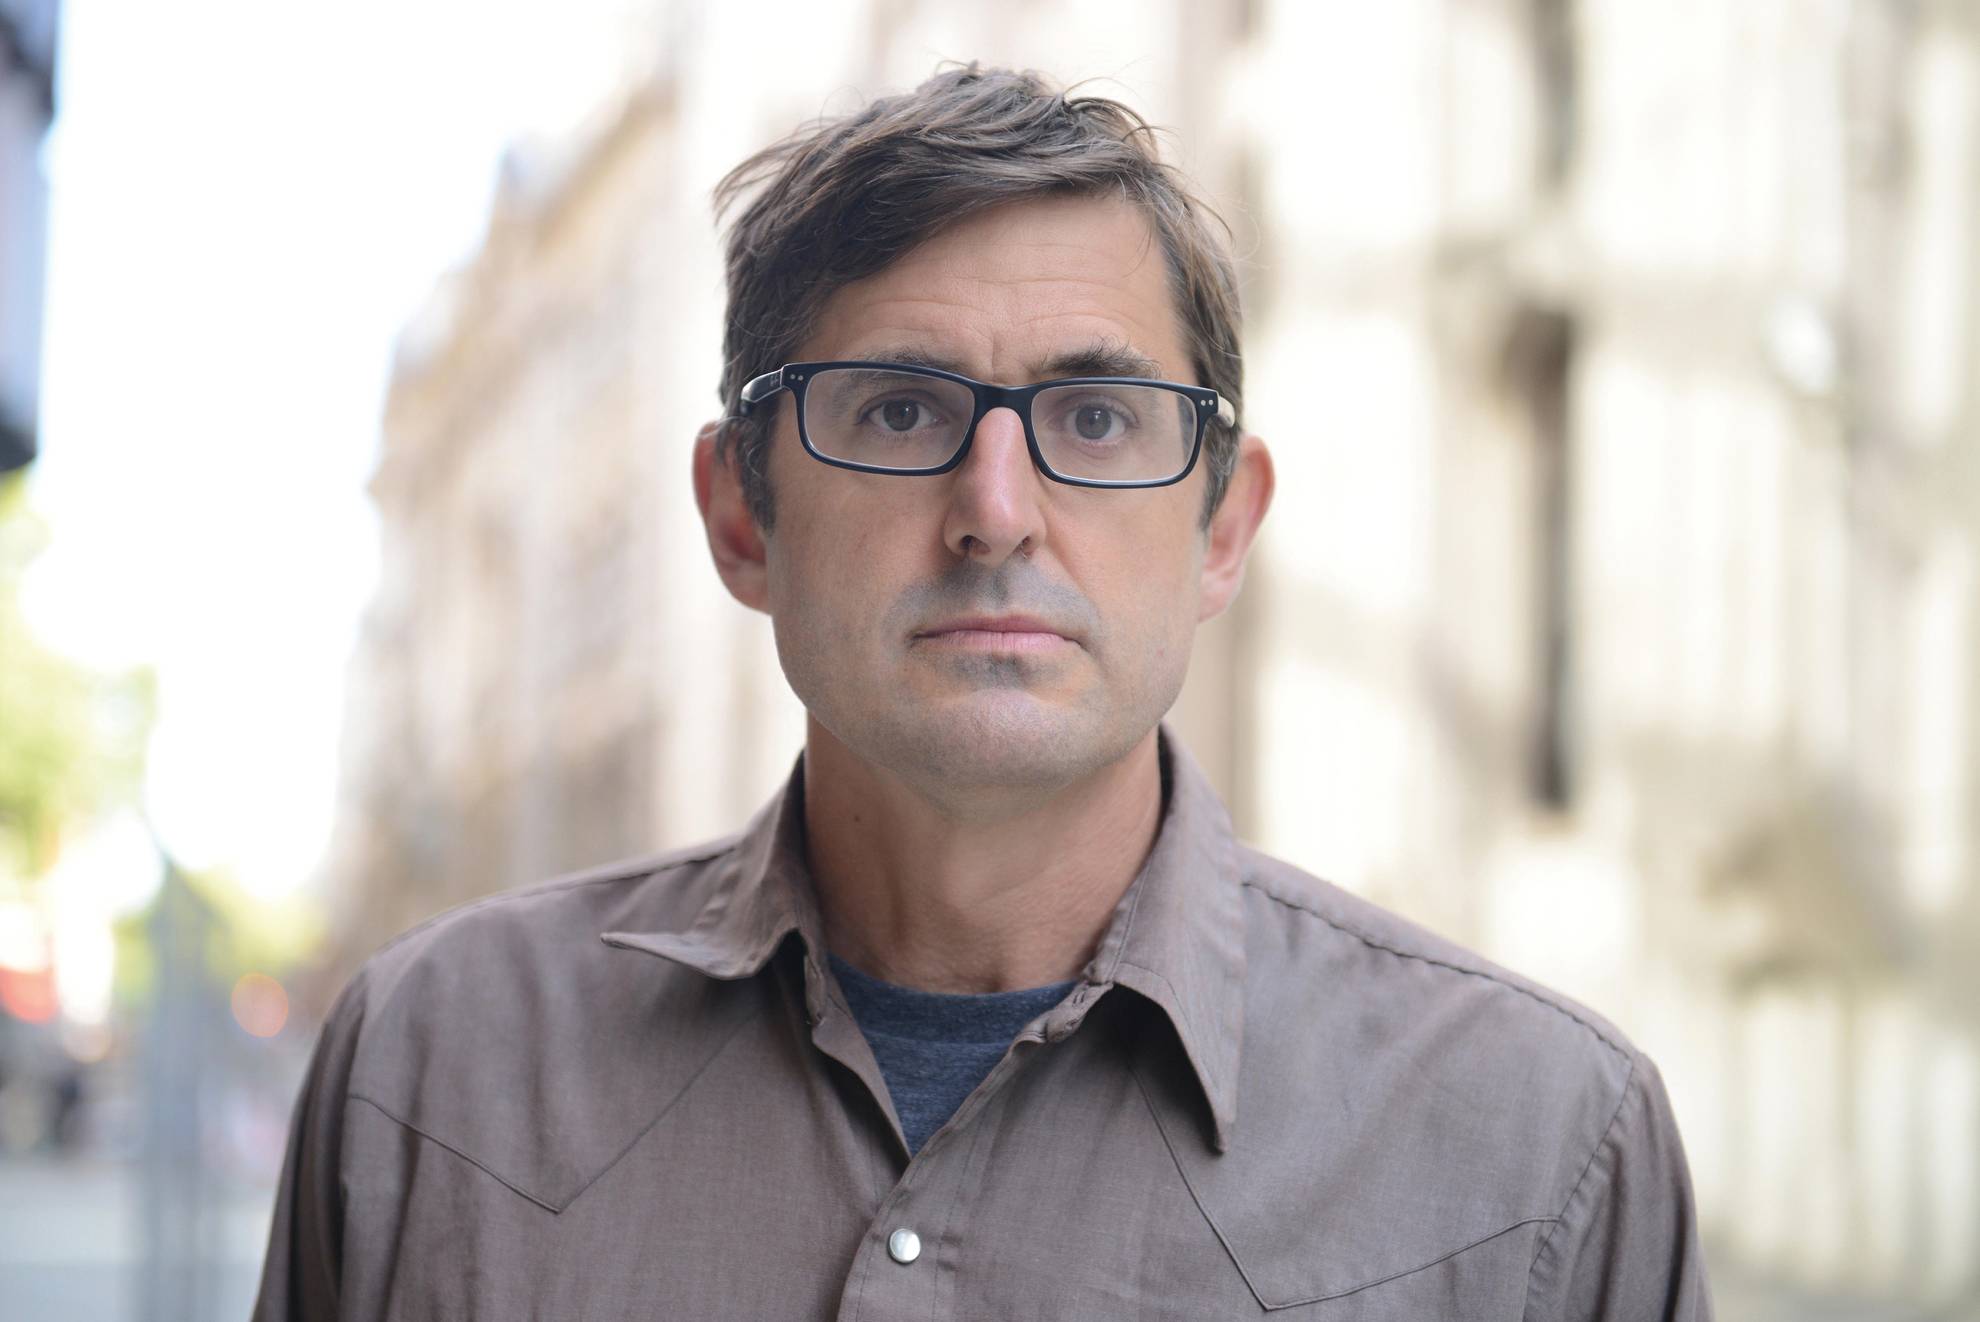 Louis Theroux promotional shot from Saville documentary